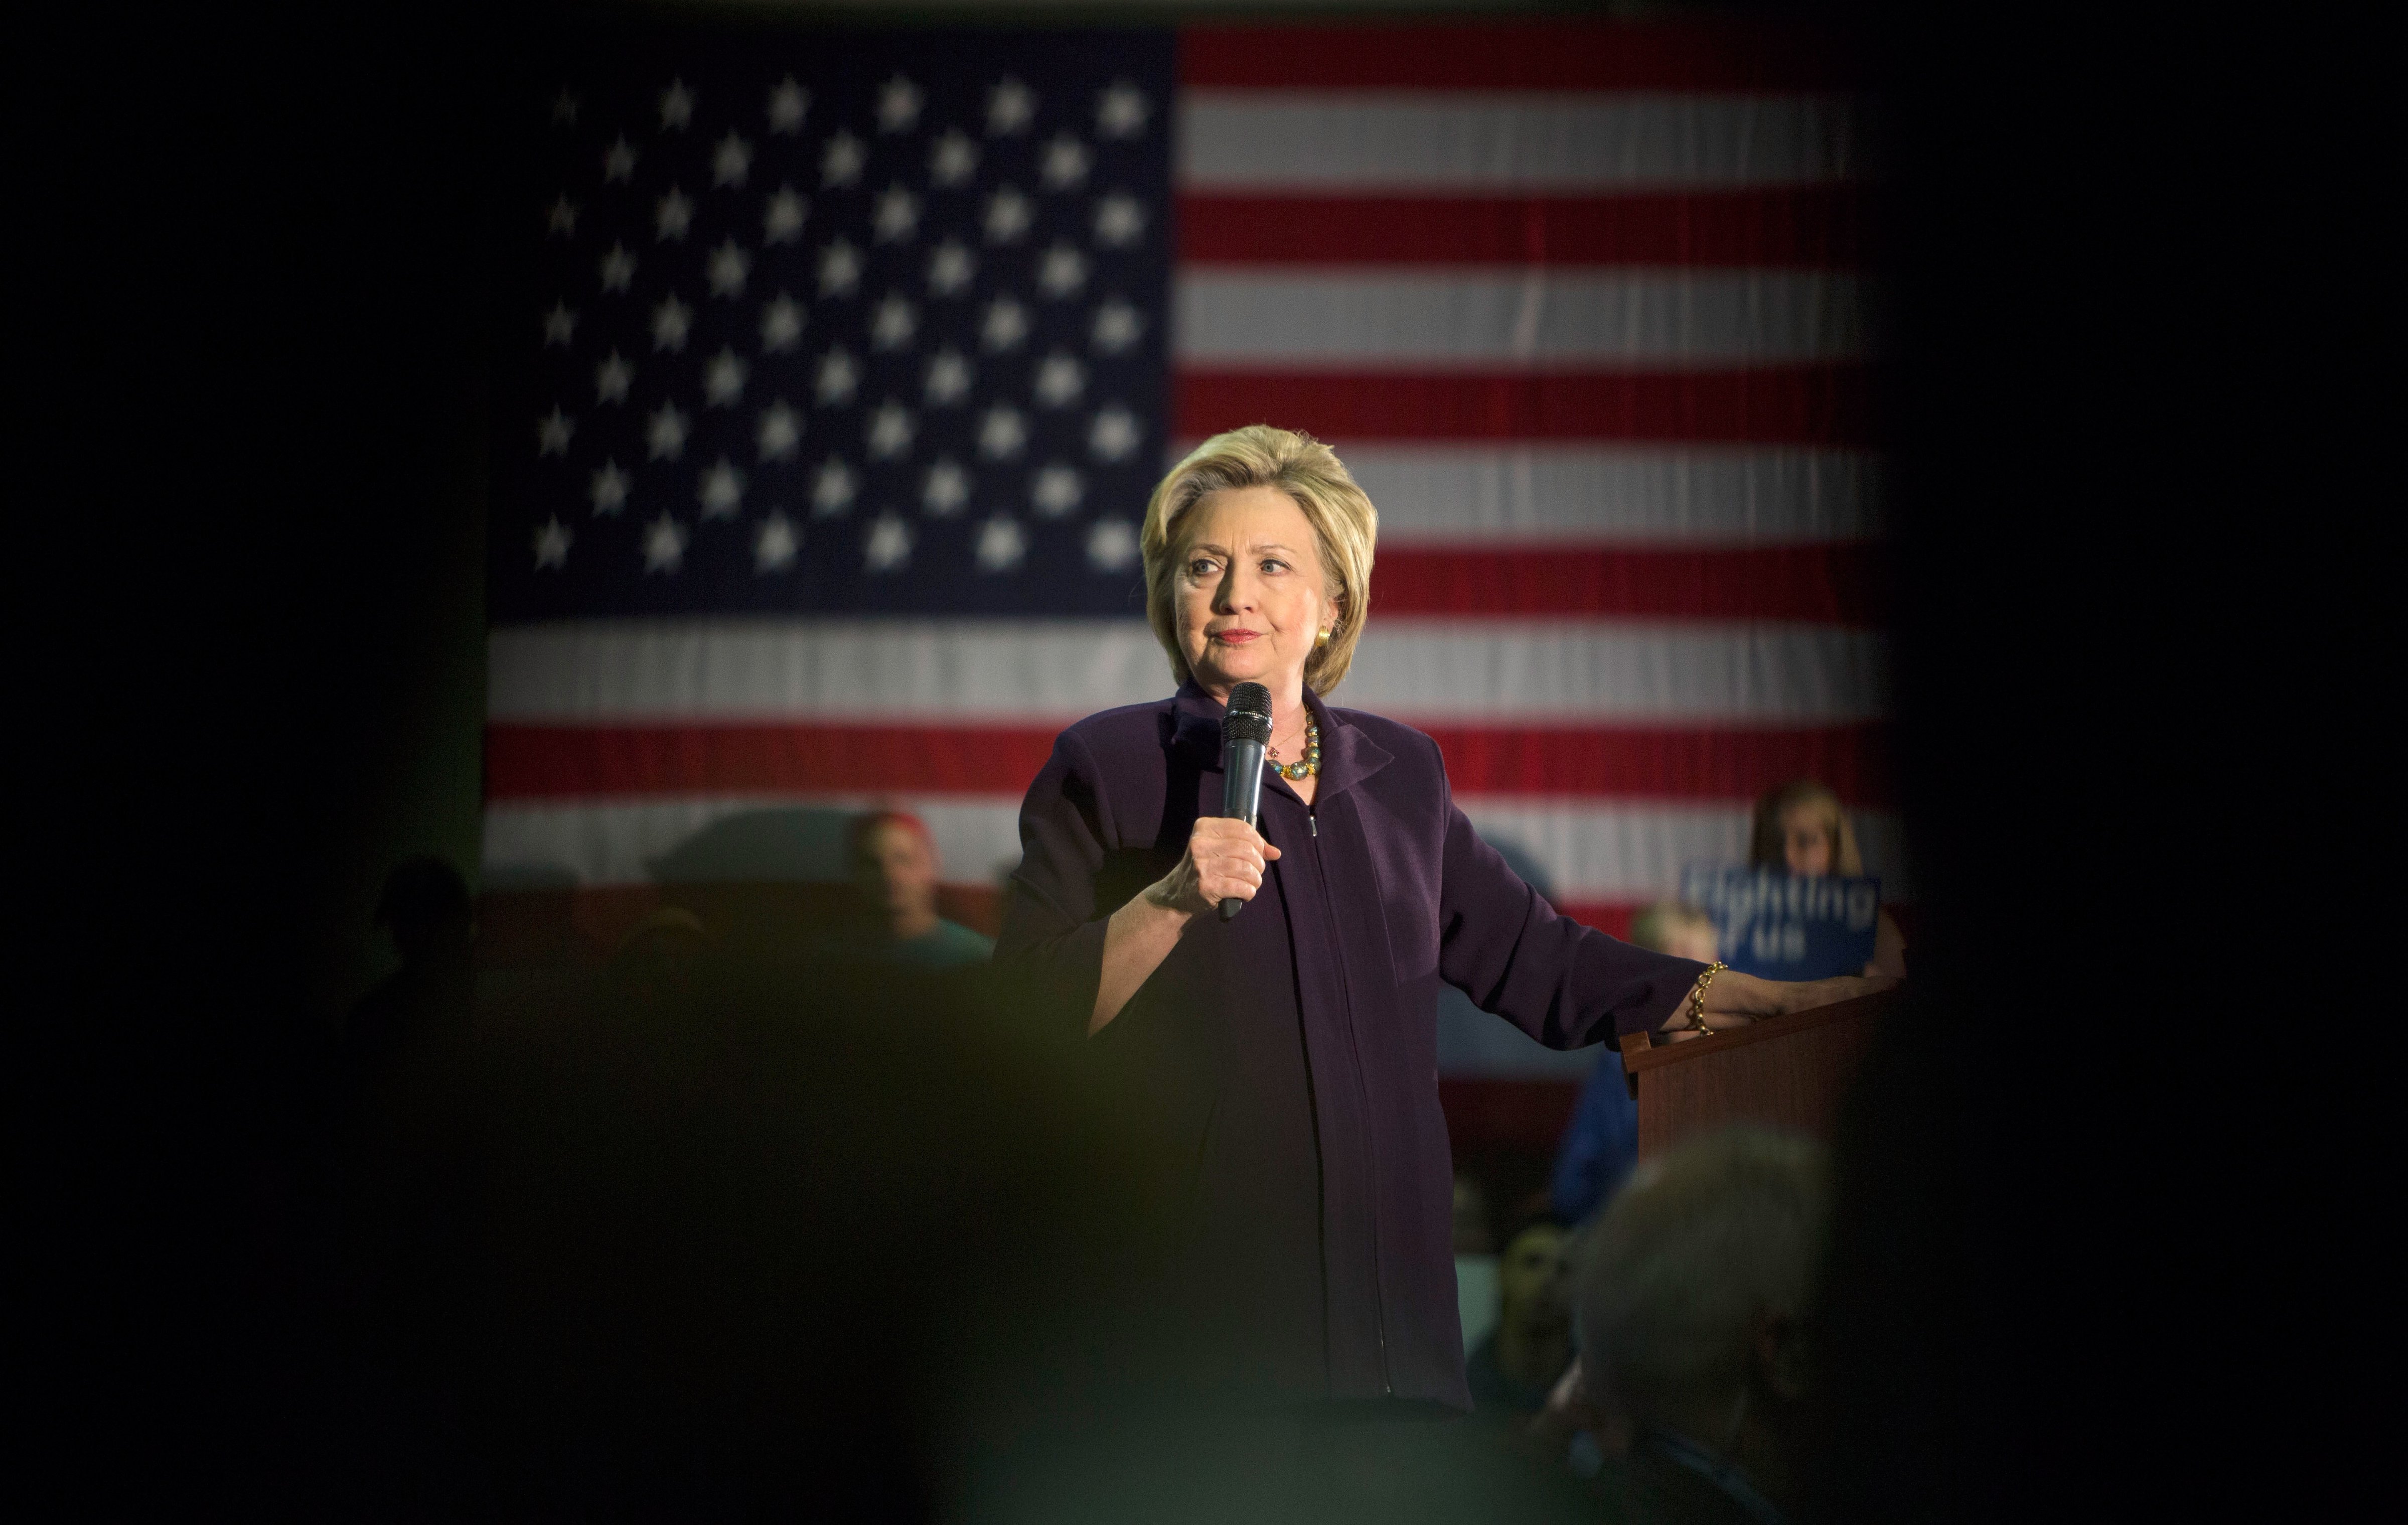 Democratic presidential candidate  Hillary Clinton  speaks at a campaign event at Camden County College on May 11, 2016 in Blackwood, New Jersey.